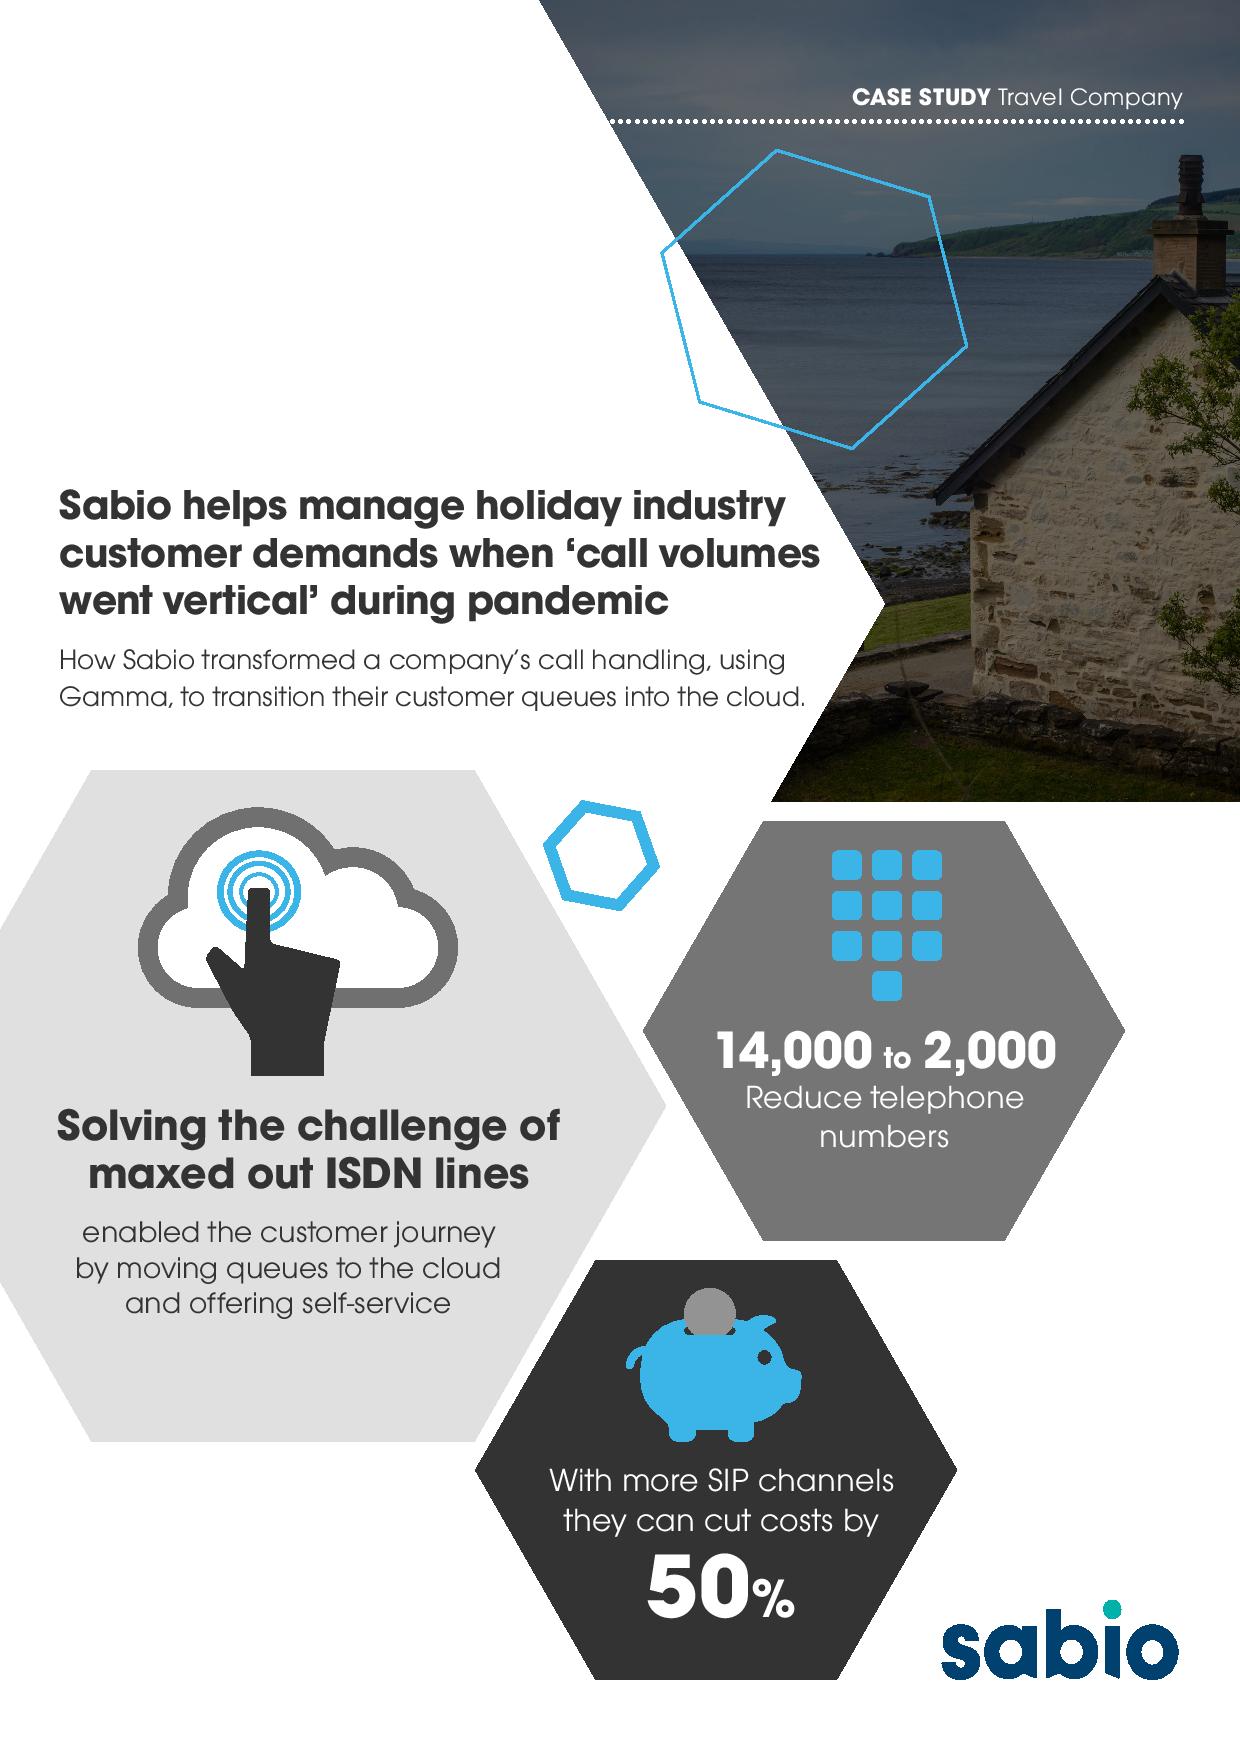 Sabio helps manage holiday industry customer demands when ‘call volumes went vertical’ during pandemic